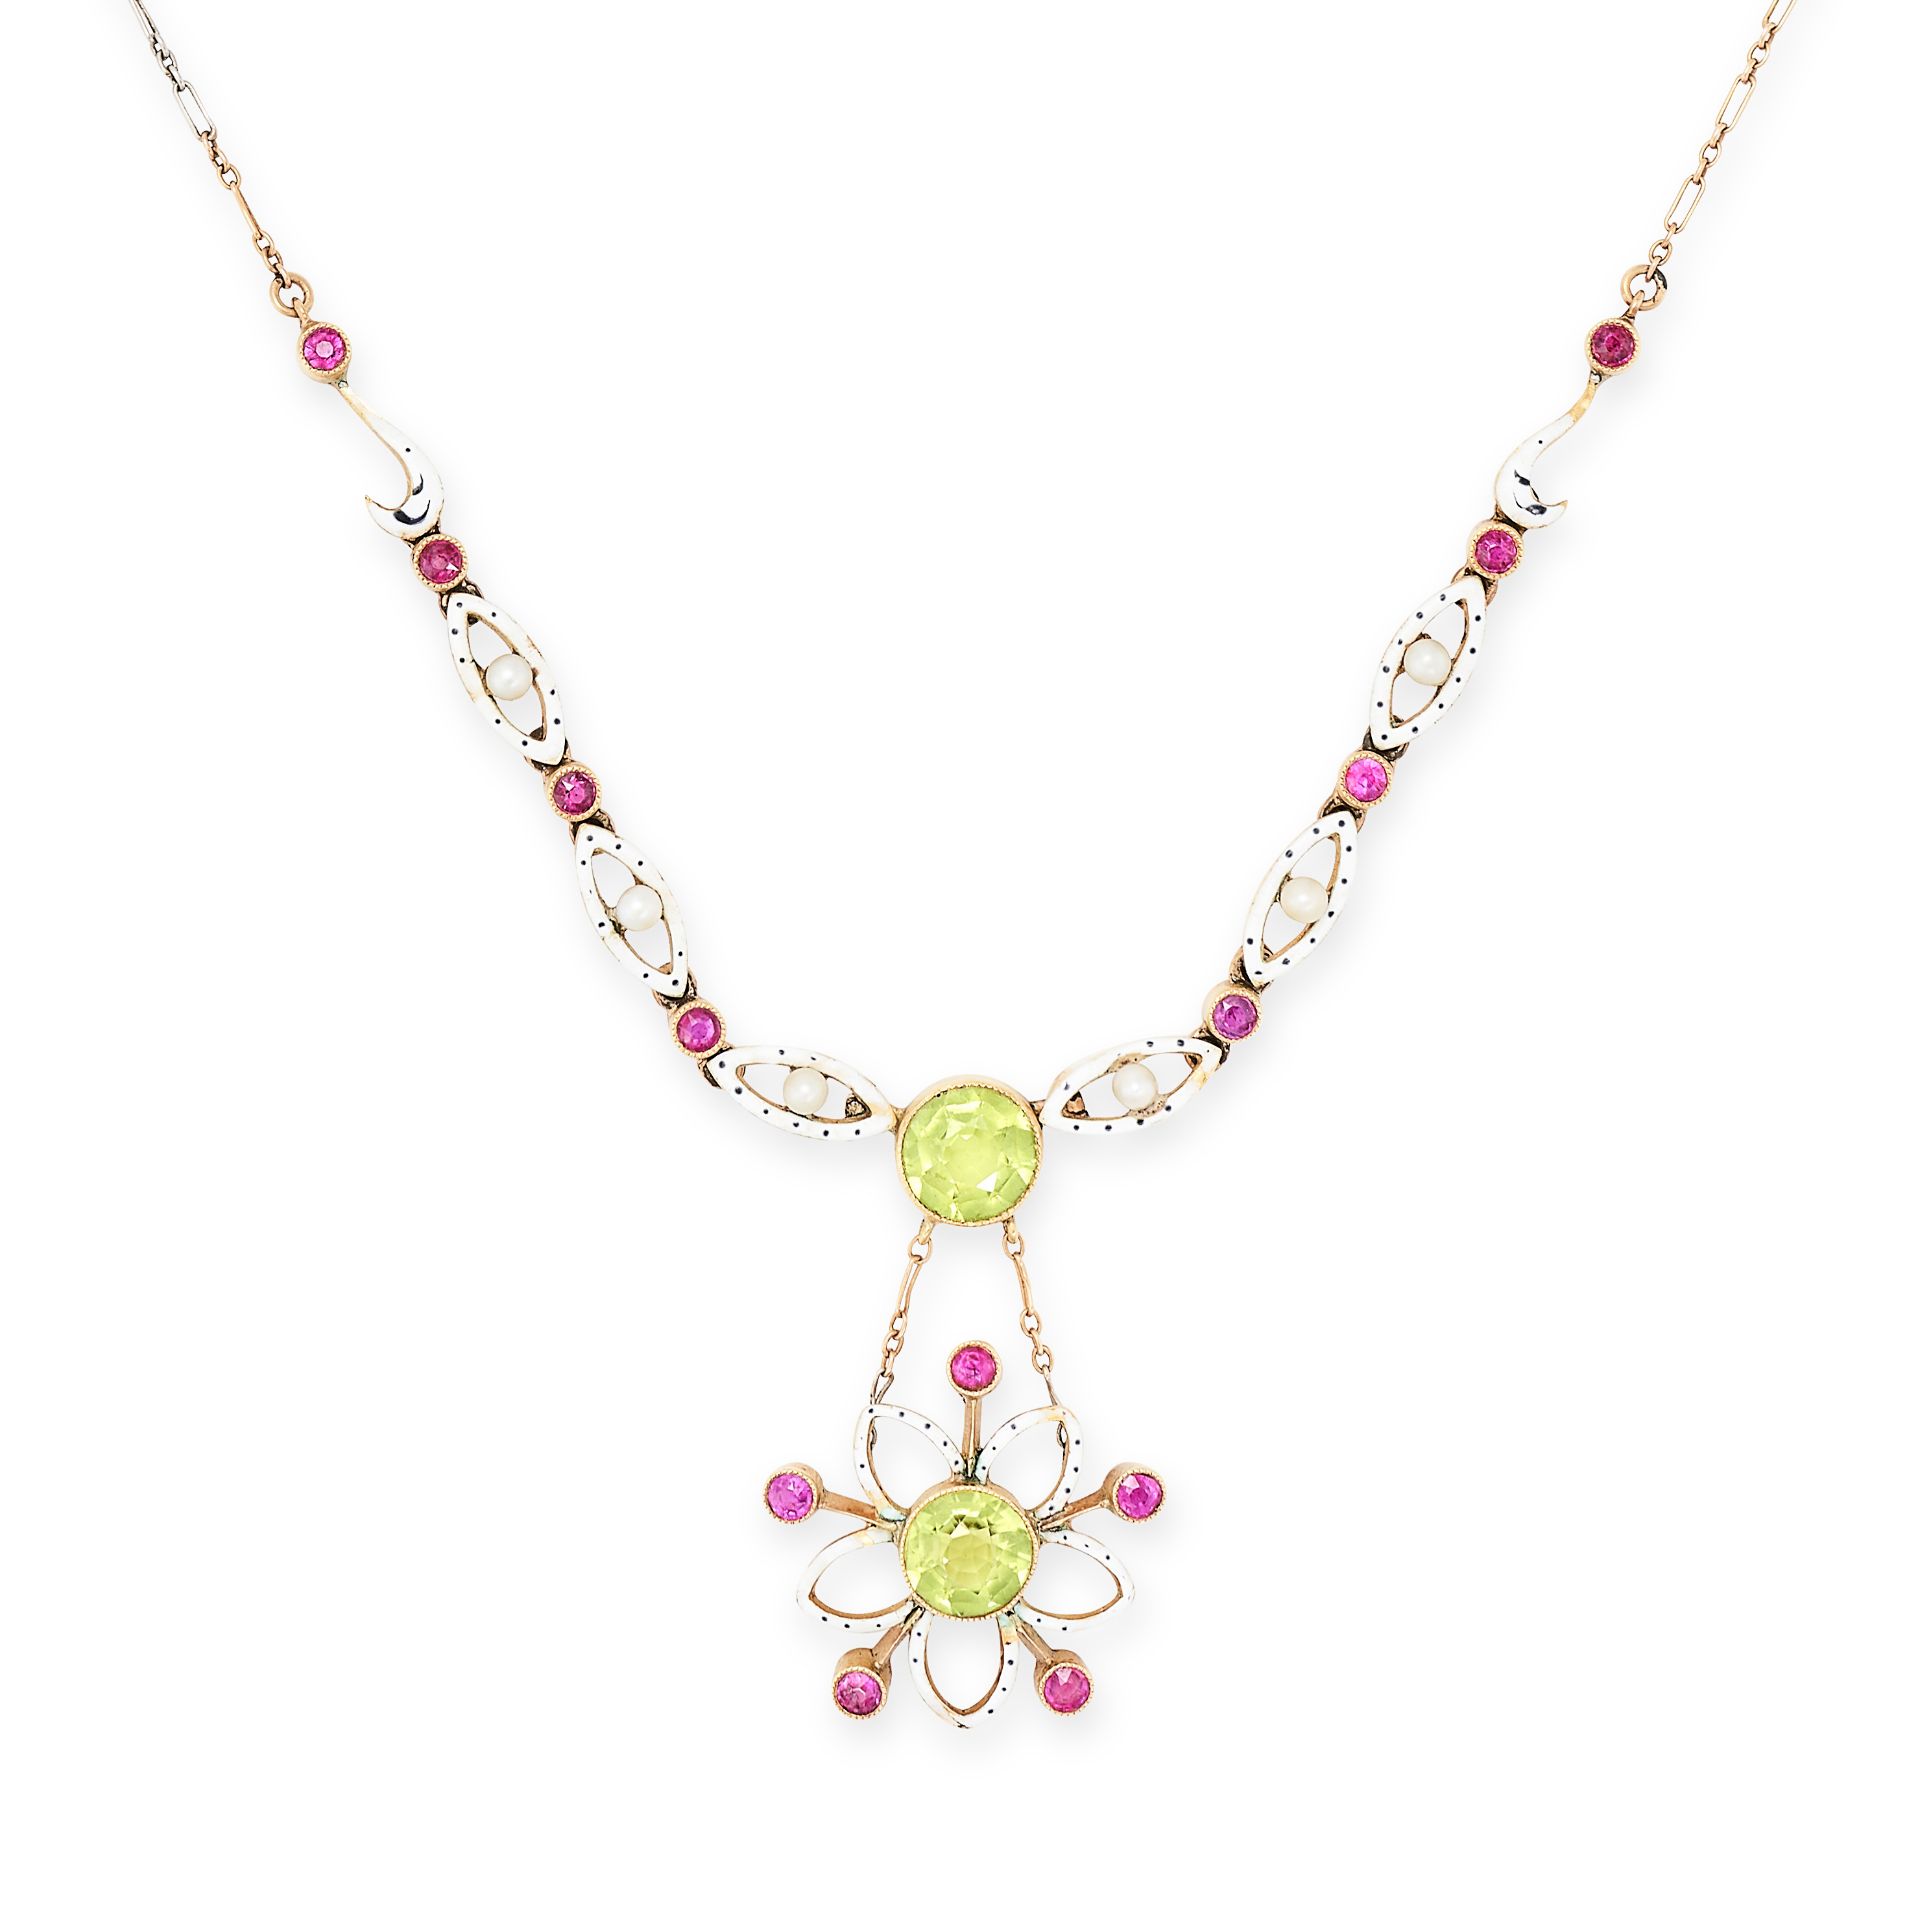 AN ANTIQUE PERIDOT, RUBY, PEARL AND ENAMEL NECKLACE in yellow gold, set with a central round cut ... - Image 2 of 2